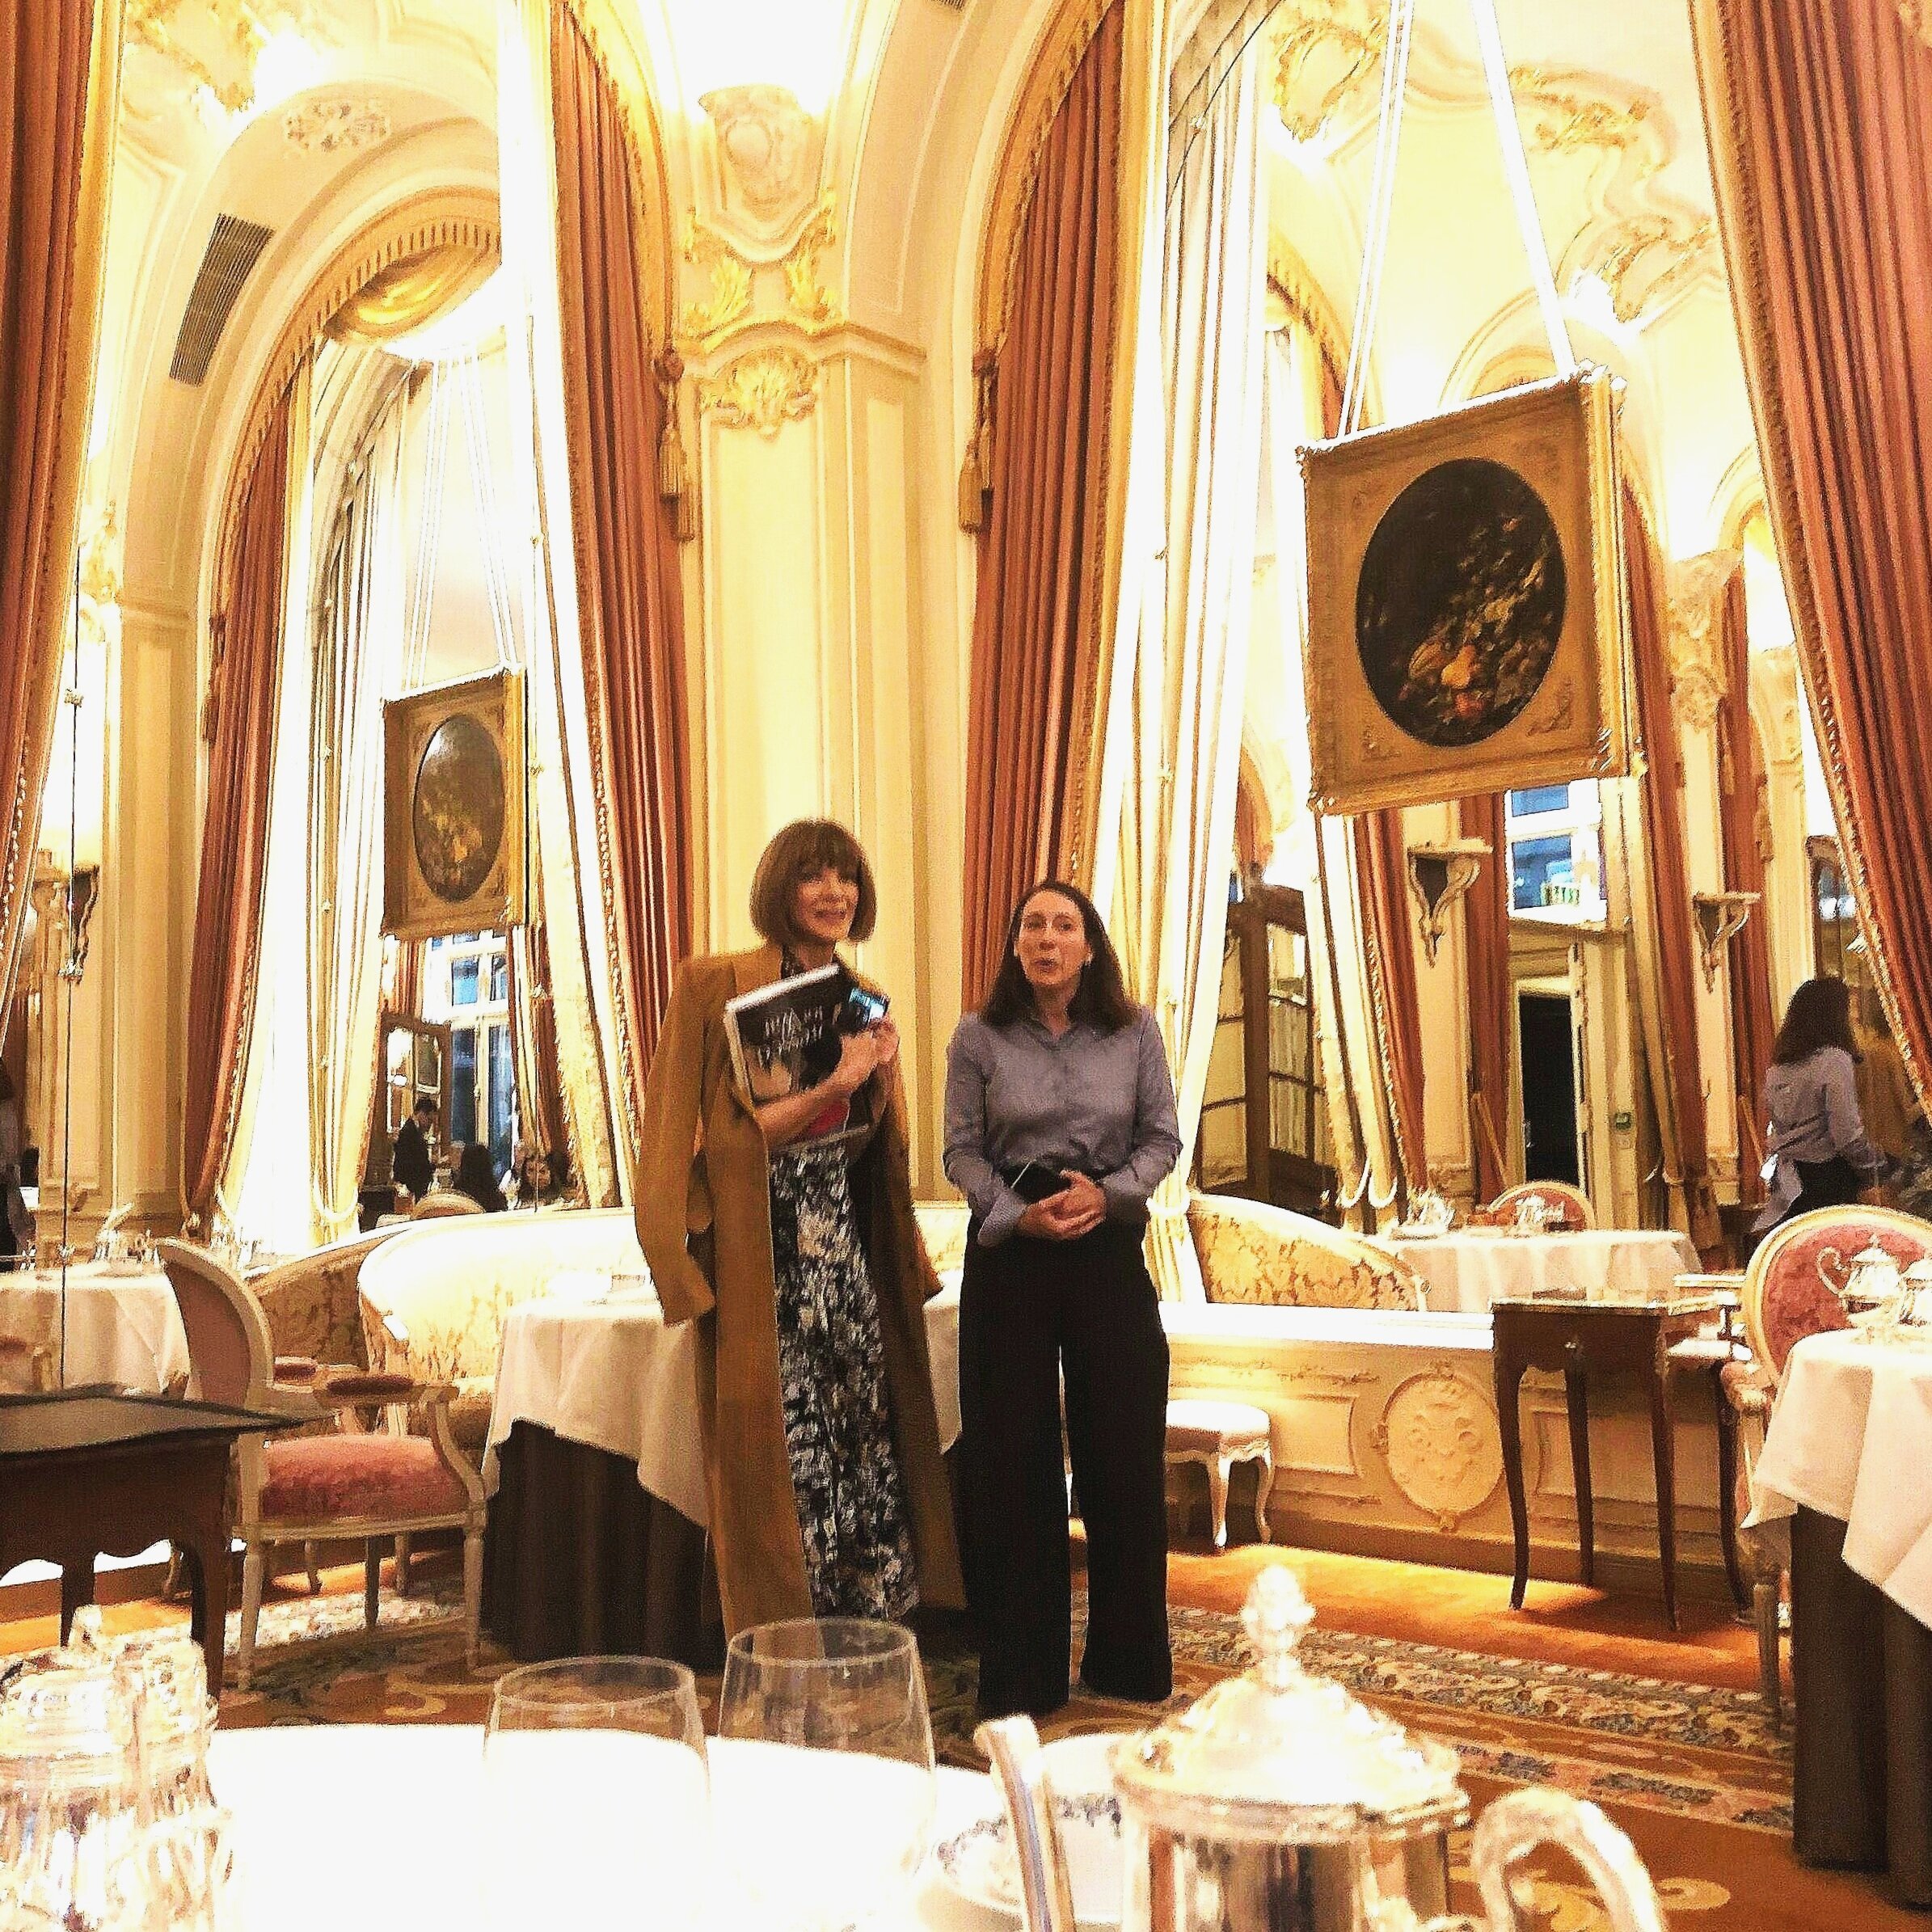 Anna Wintour at the Ritz Dining Room